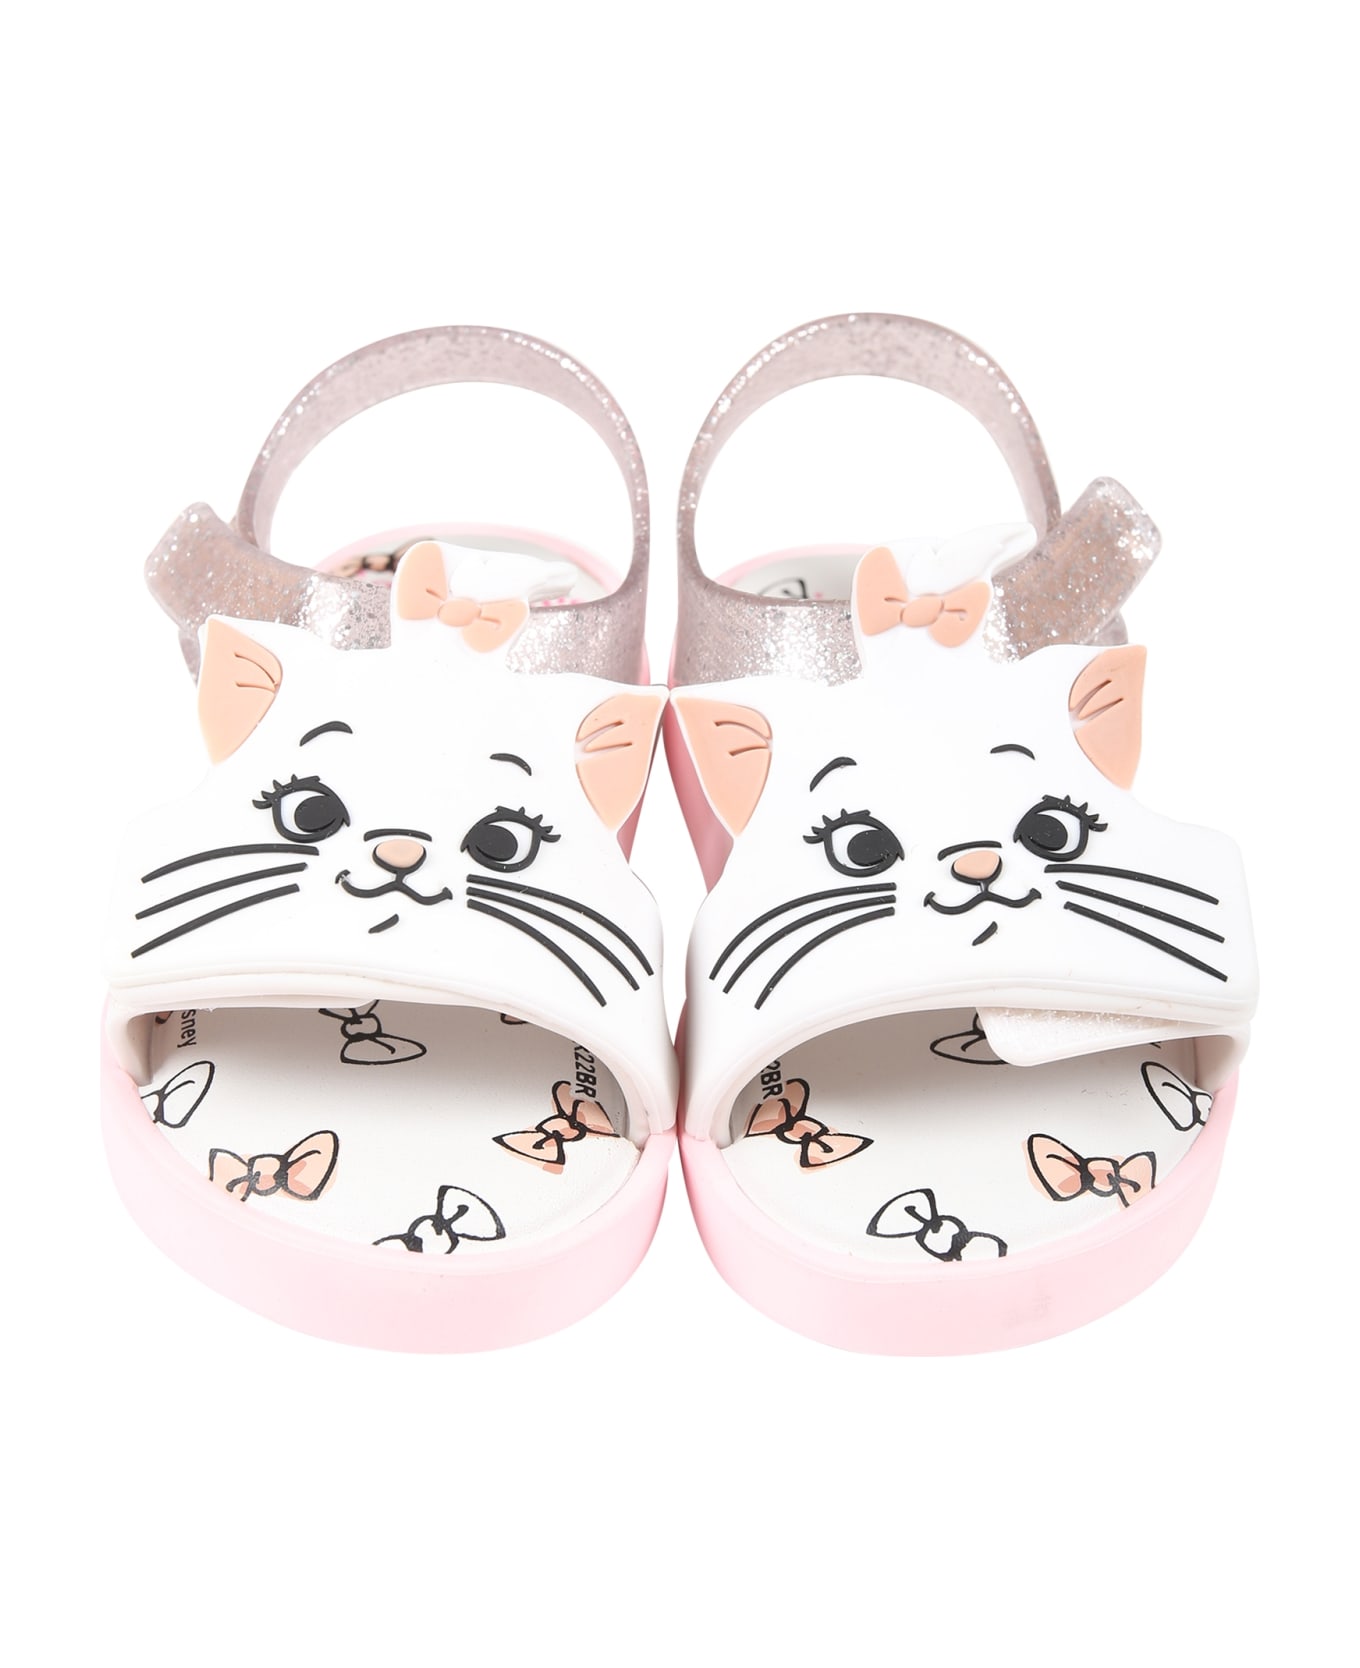 Melissa Pink Sandals For Girl With Marie - Pink シューズ